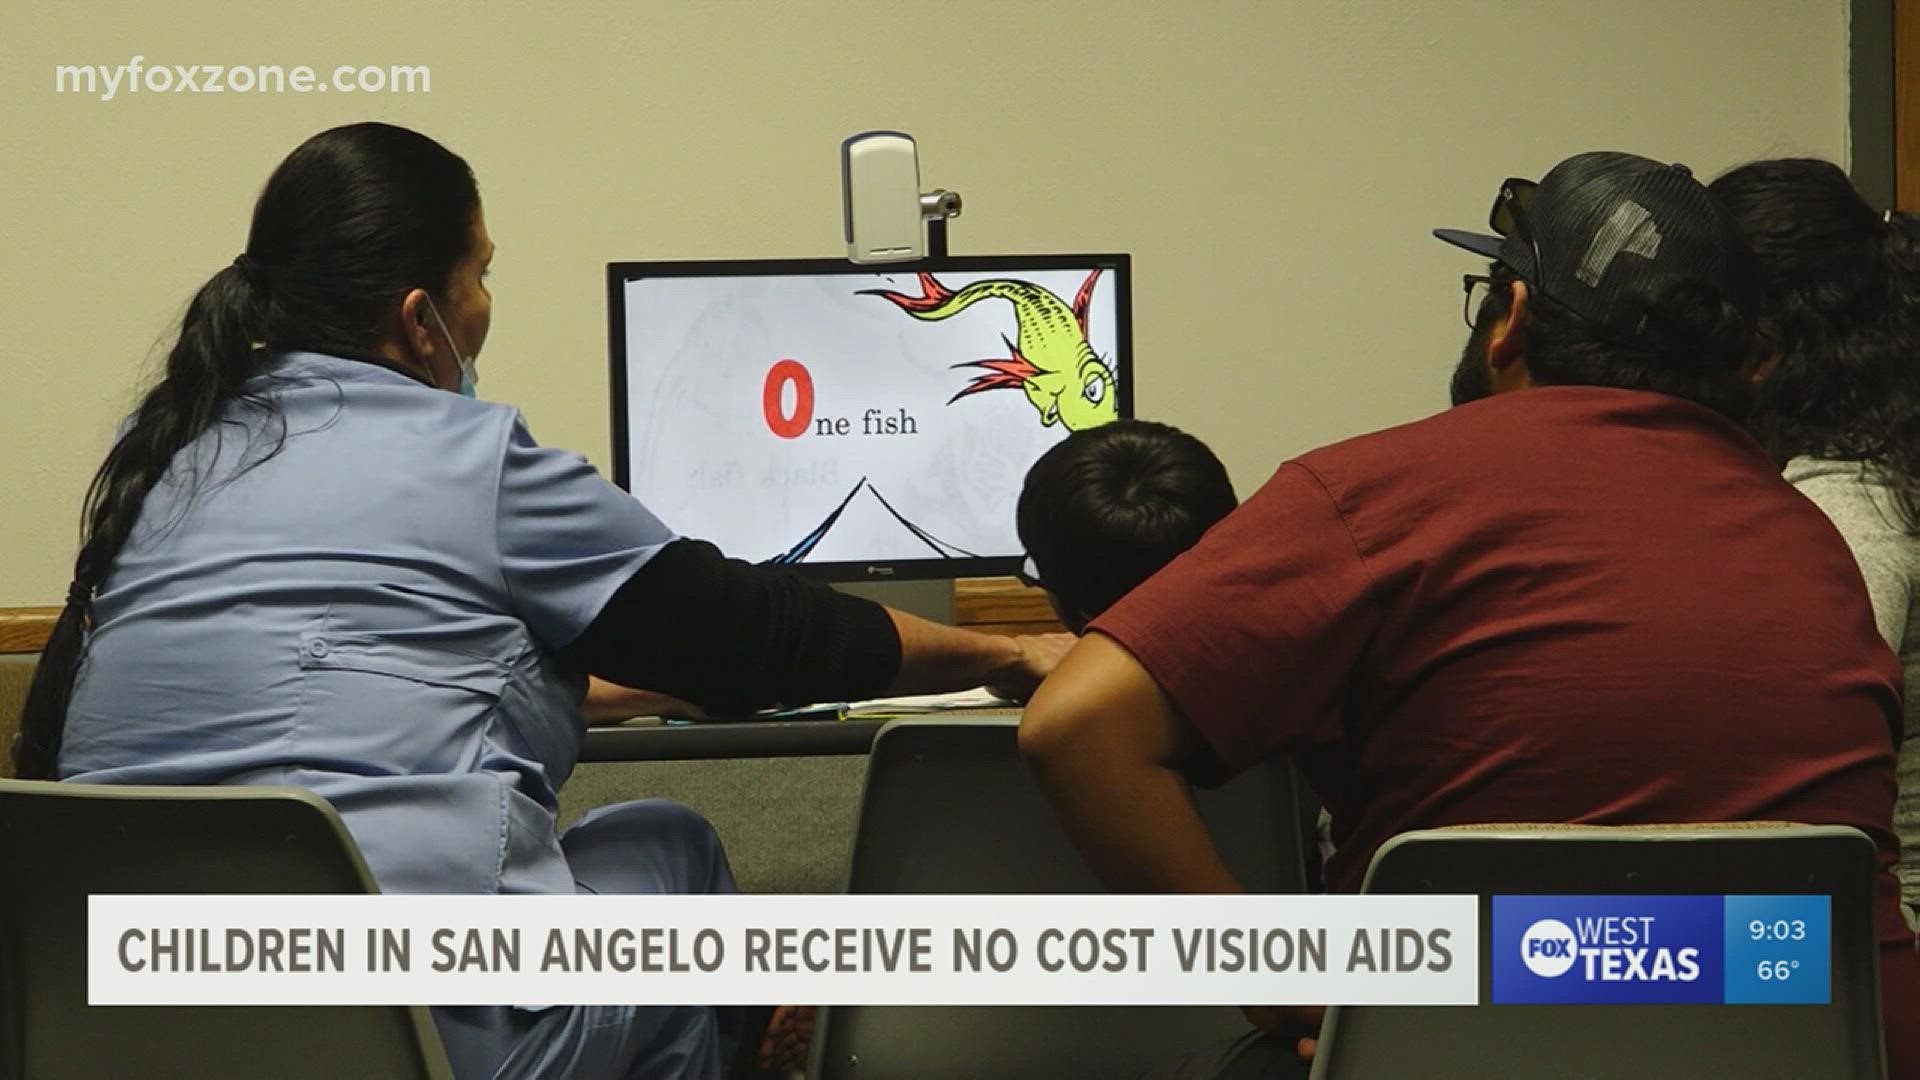 Sight Savers America partnered up with low vision optometrists and local school systems to provide vision aids to children across West Texas.